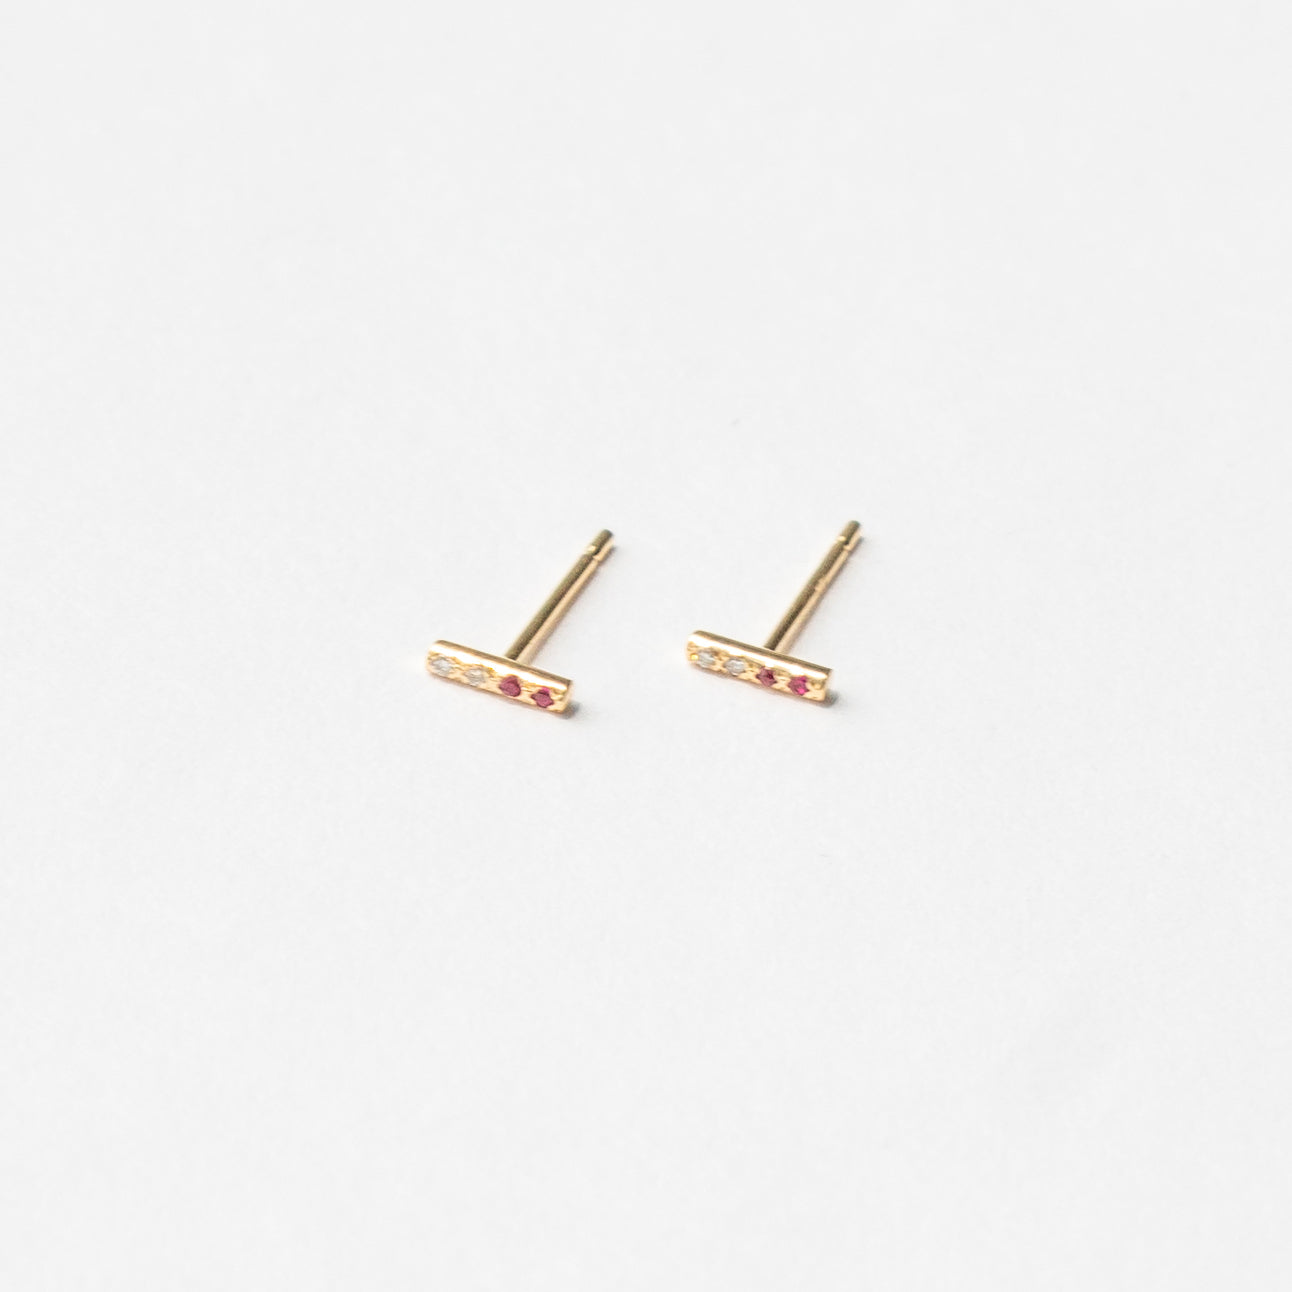 VIvi Unique earrings in 14k Gold set with rubies made in NYC by SHW fine Jewelry